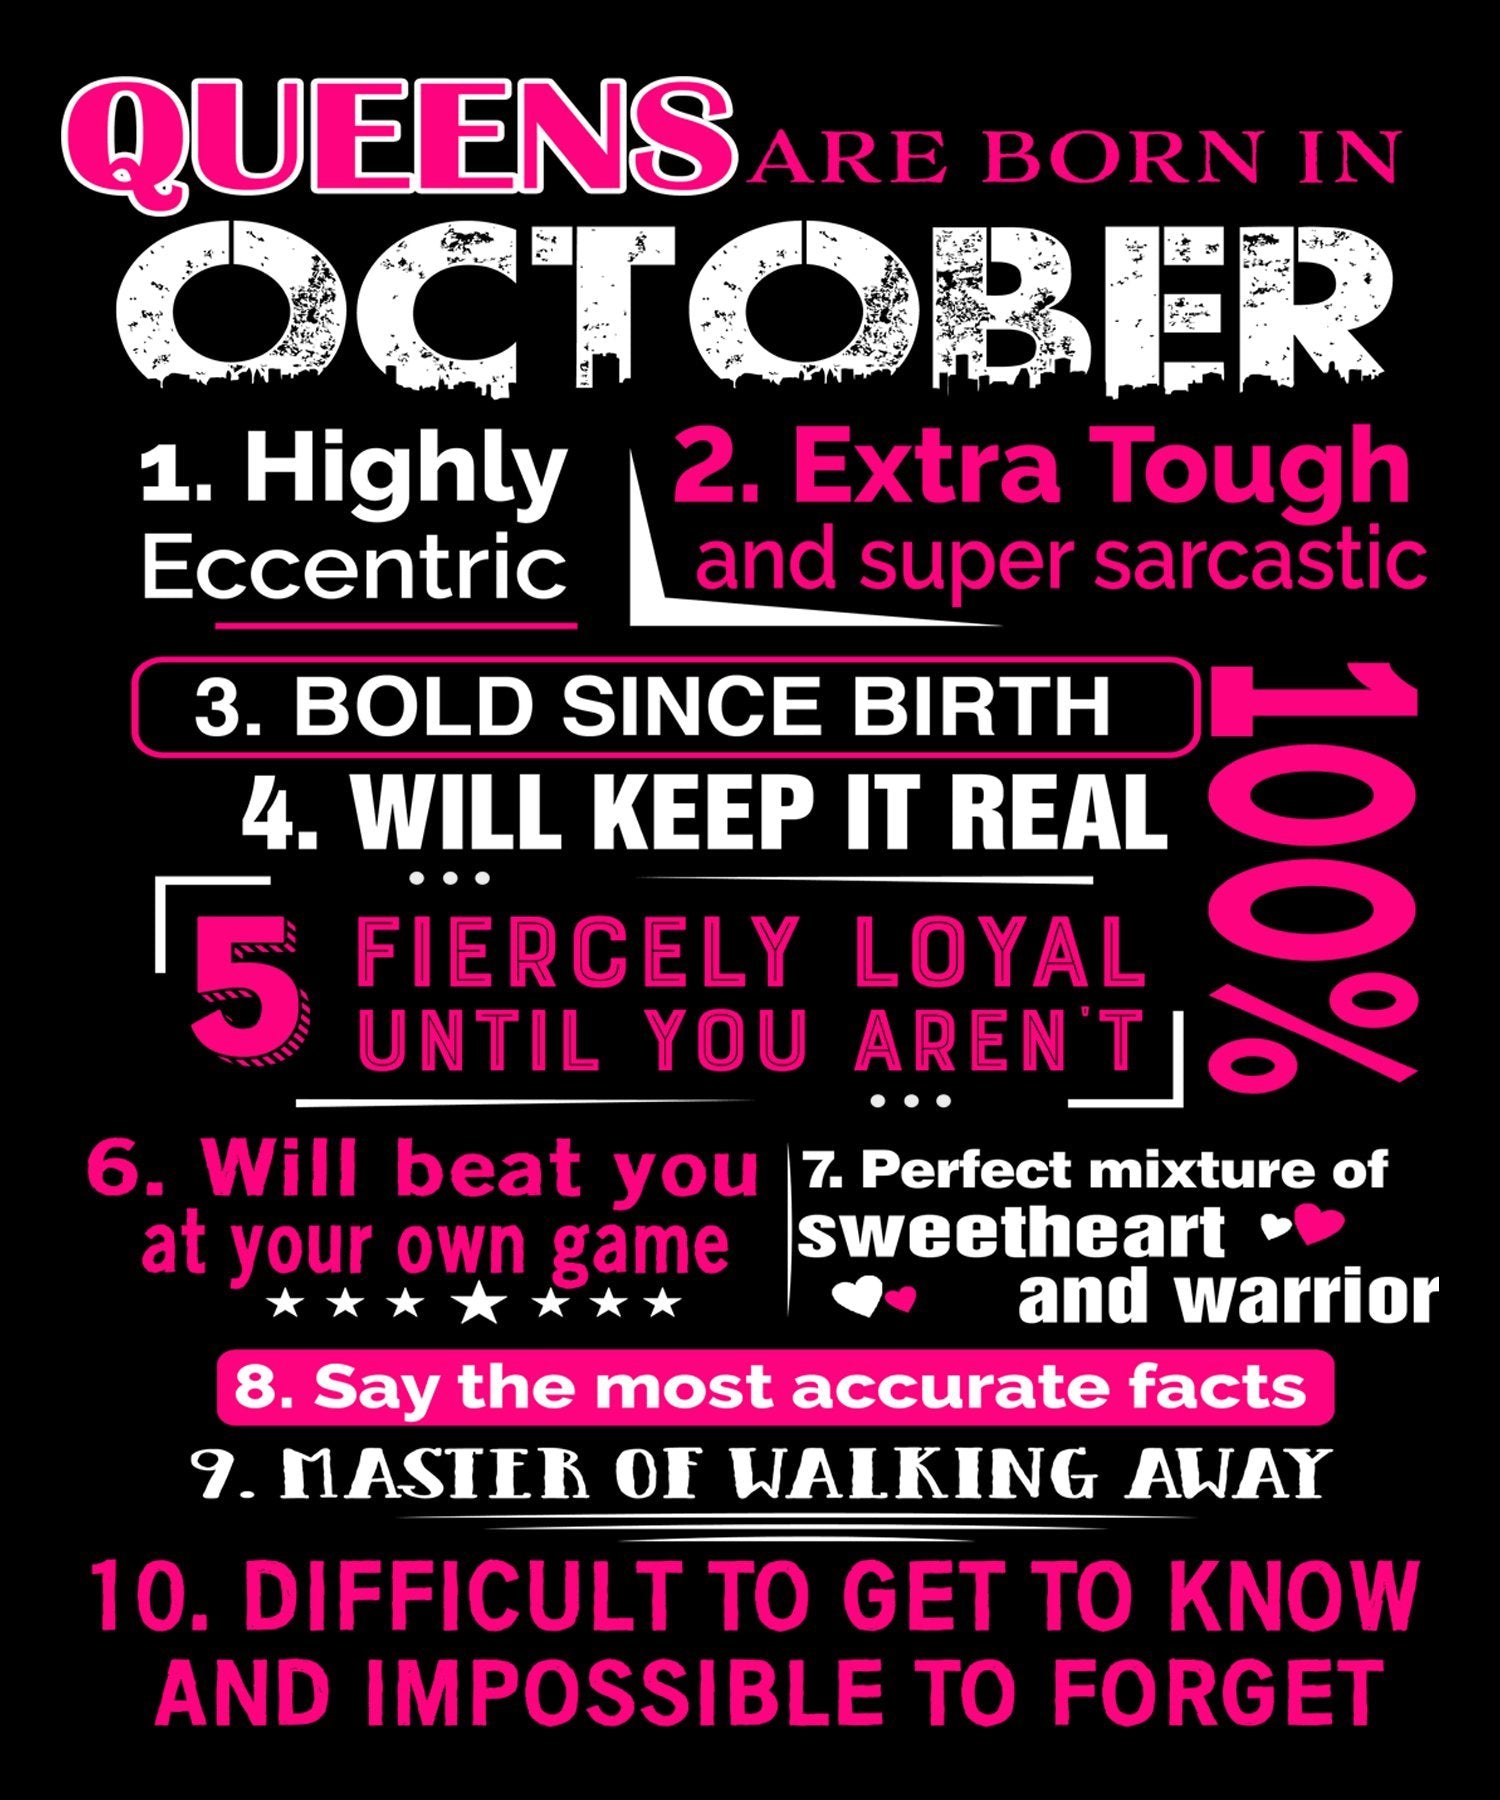 "Queens Are Born In October 10 Reasons"